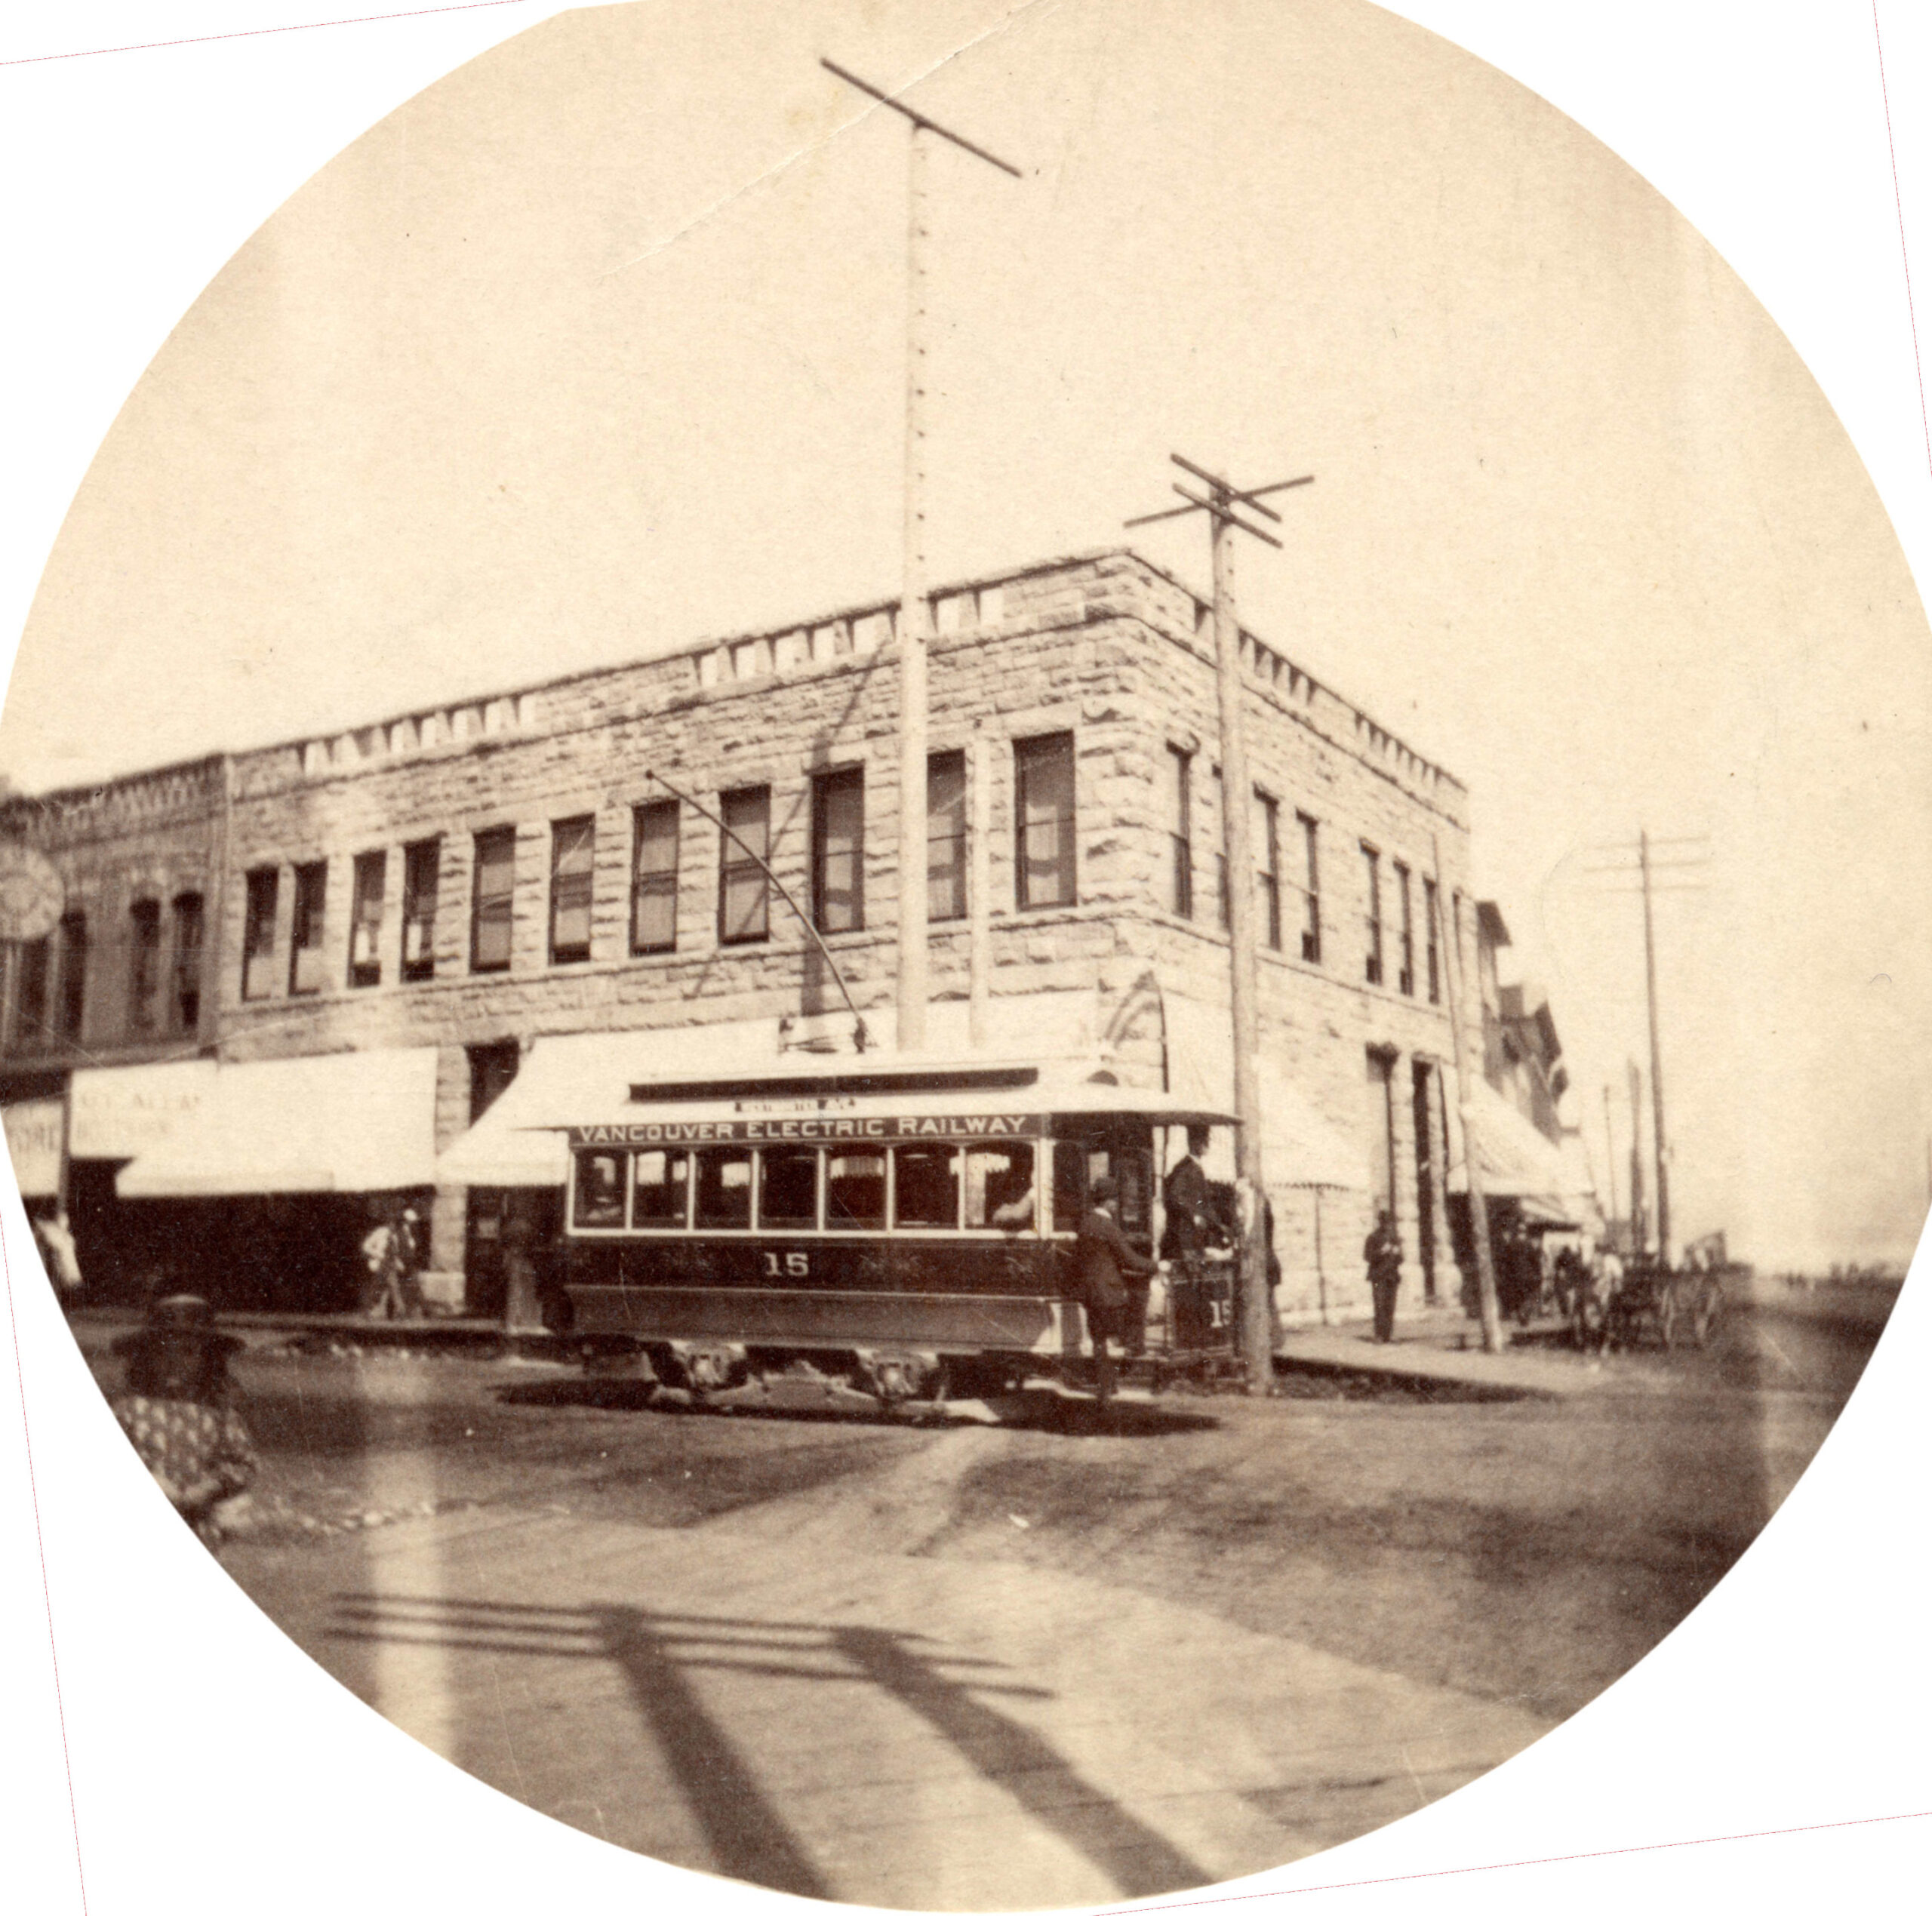 vancouver electric railway car 1891 turning north onto carrall Street from Cordova St.